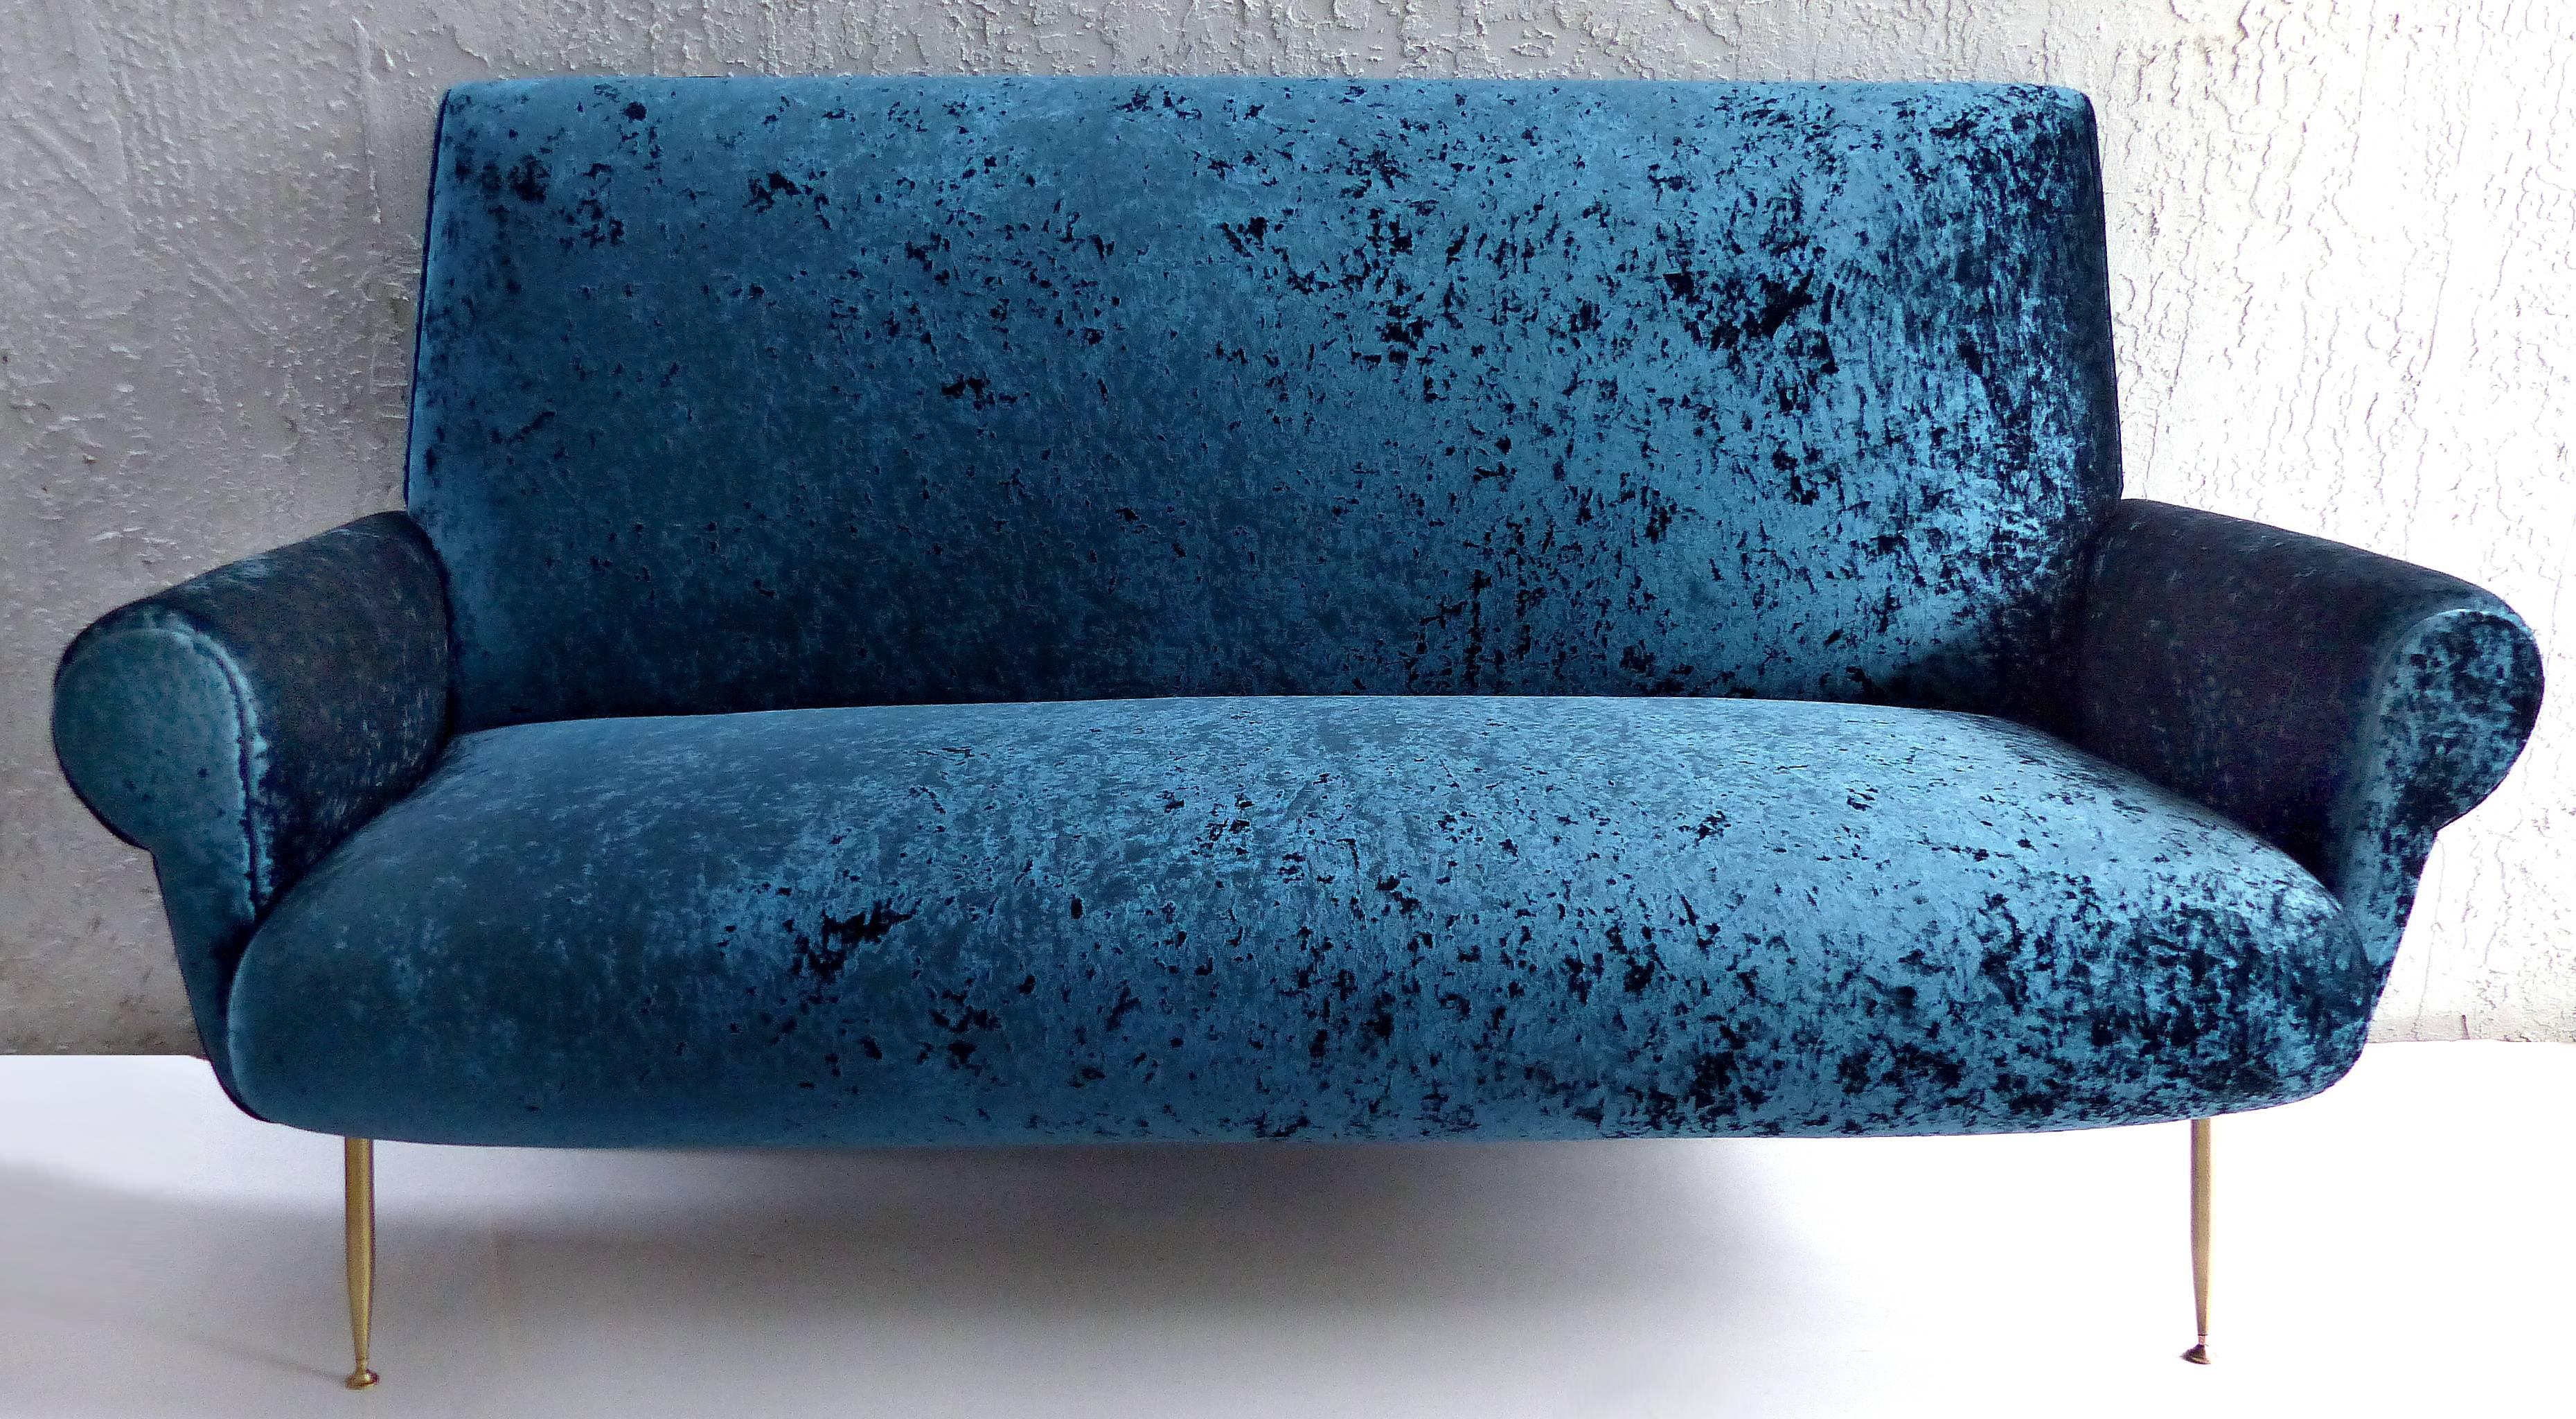 Offered for sale is a striking 1950s Italian modern sofa by Gigi Radice. The sofa has been newly upholstered in an unusual burn-out look velvet which is quite durable. The brass legs have been polished for a lovely contrast. Measures: Seat height,